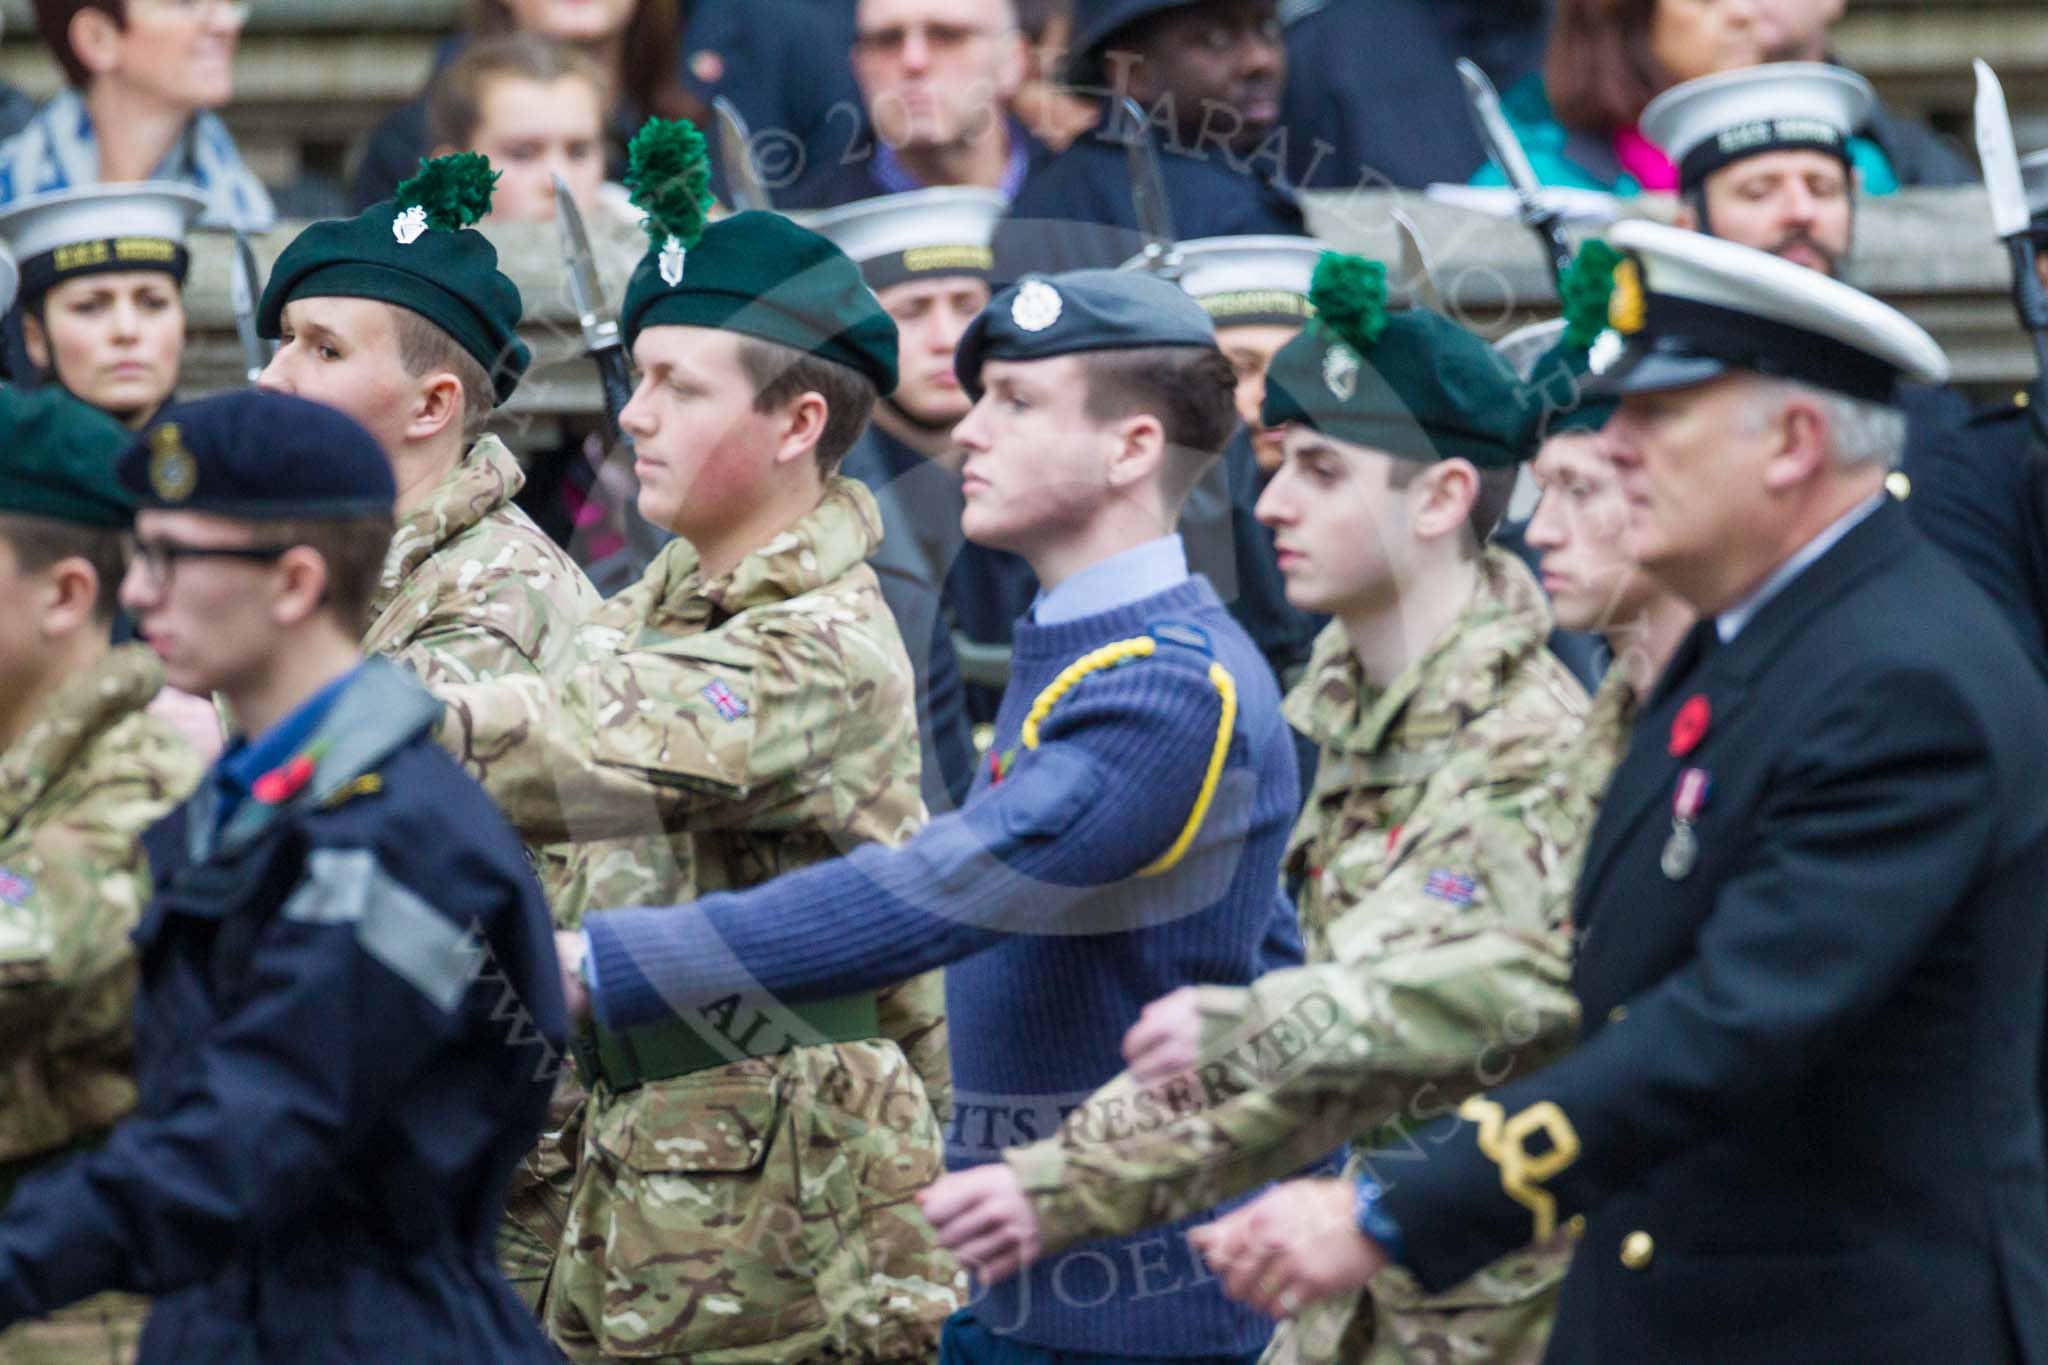 Remembrance Sunday at the Cenotaph 2015: Group M46, Sea Cadet Corps.
Cenotaph, Whitehall, London SW1,
London,
Greater London,
United Kingdom,
on 08 November 2015 at 12:20, image #1696